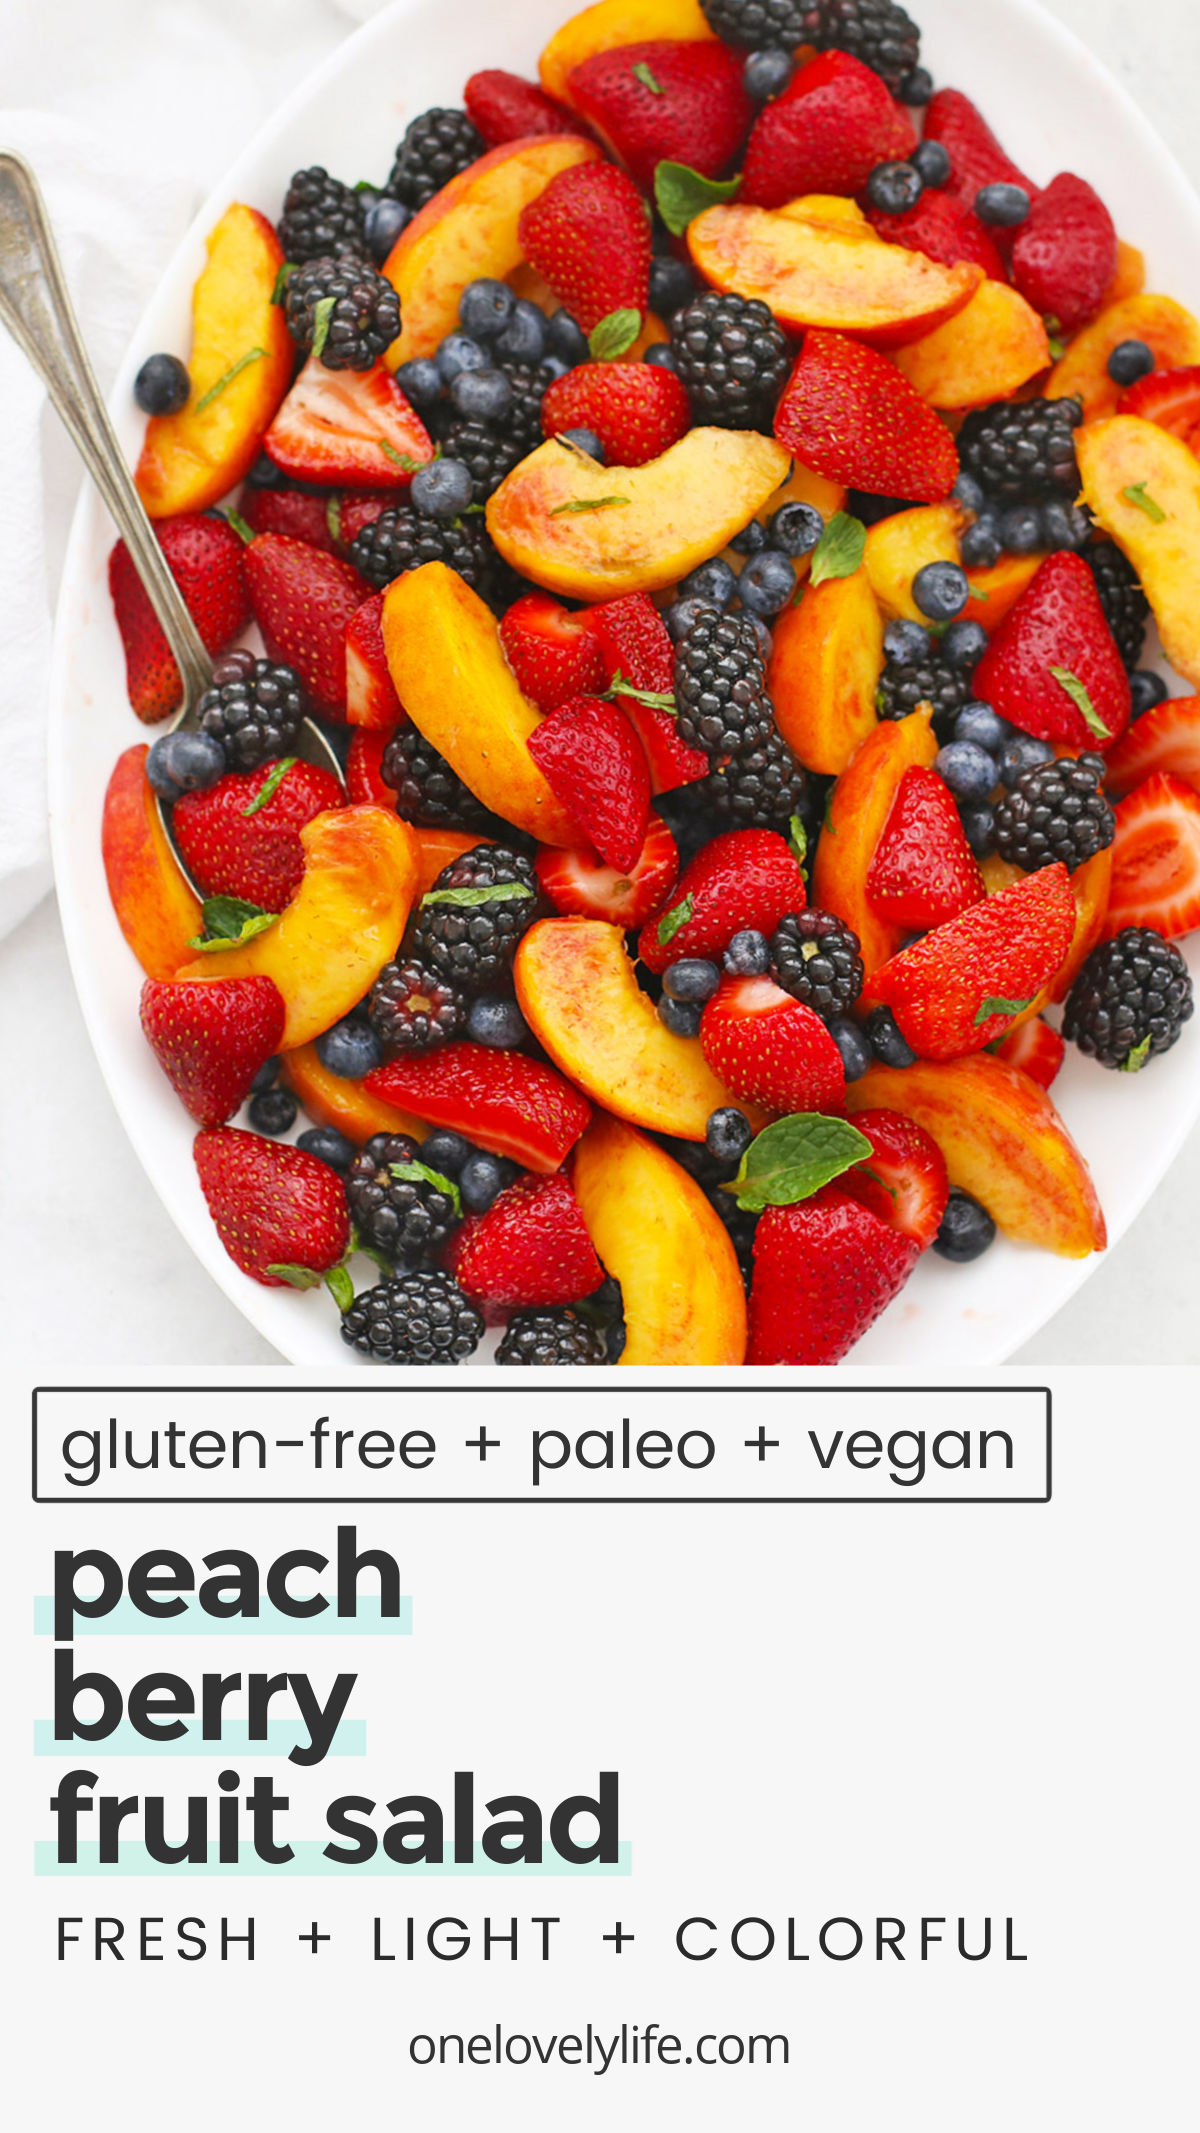 Peach Berry Fruit Salad - This summer fruit salad uses the BEST combination of fresh peaches and berries with a bright, tangy dressing to make a beautiful side dish everyone will love! (Paleo or Vegan) // Peach Fruit Salad Recipe // Summer Fruit Salad Recipe // BBQ Side Dish // Side Salad